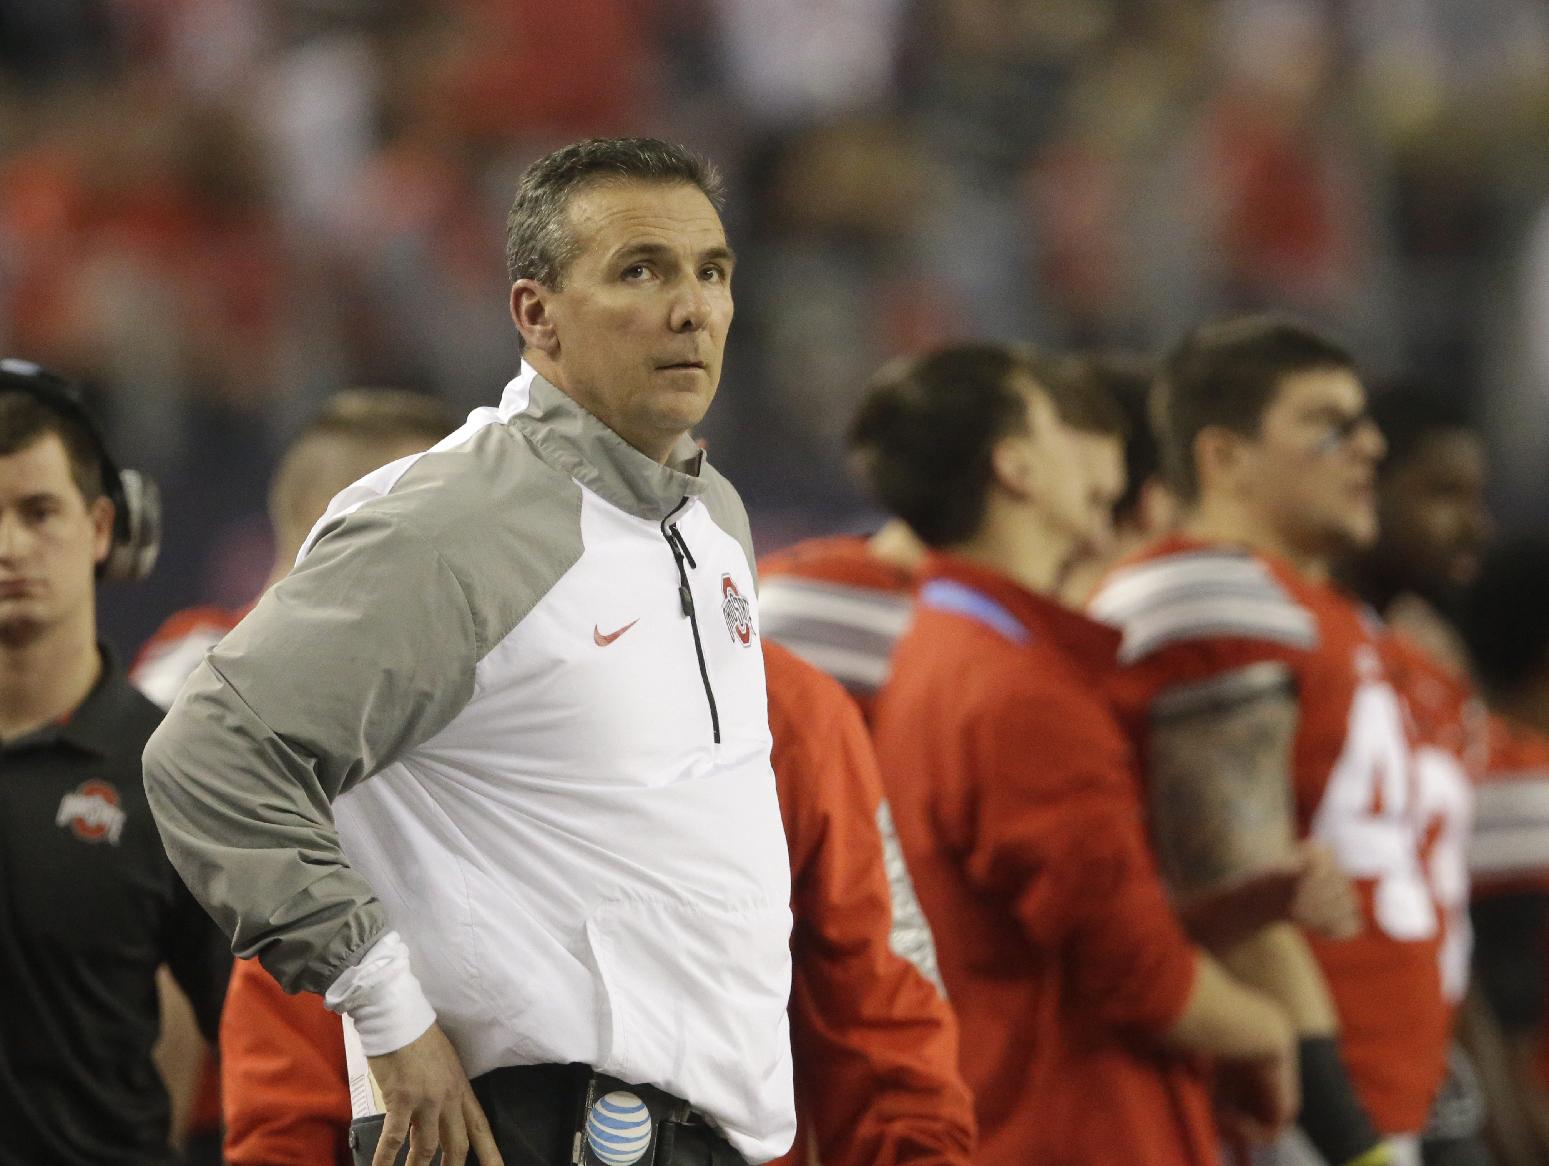 Ohio State head coach Urban Meyer watches during the first half of the NCAA college football playoff championship game against Oregon Monday, Jan. 12, 2015, in Arlington, Texas. (AP Photo/LM Otero)